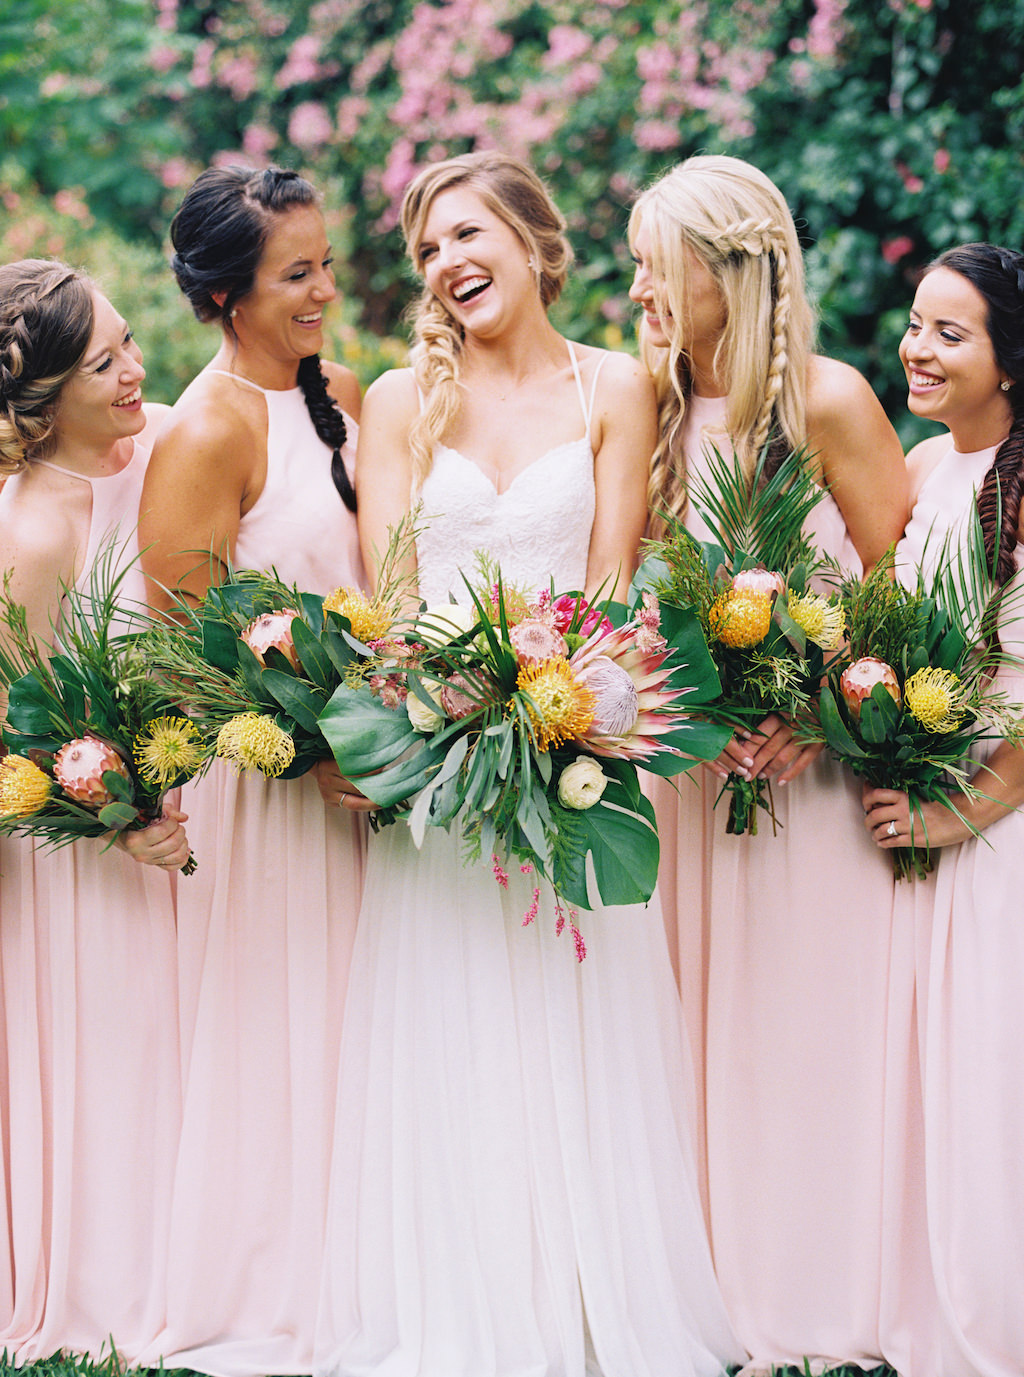 Outdoor Bride and Bridesmaid Portrait in Long Blush Pink Matching Dresses, Bride in Strappy V-neck Lace Wedding Dress with Tropical Pink, Yellow and Greenery Bouquets | St. Pete Wedding Planner Southern Glam Events and Weddings